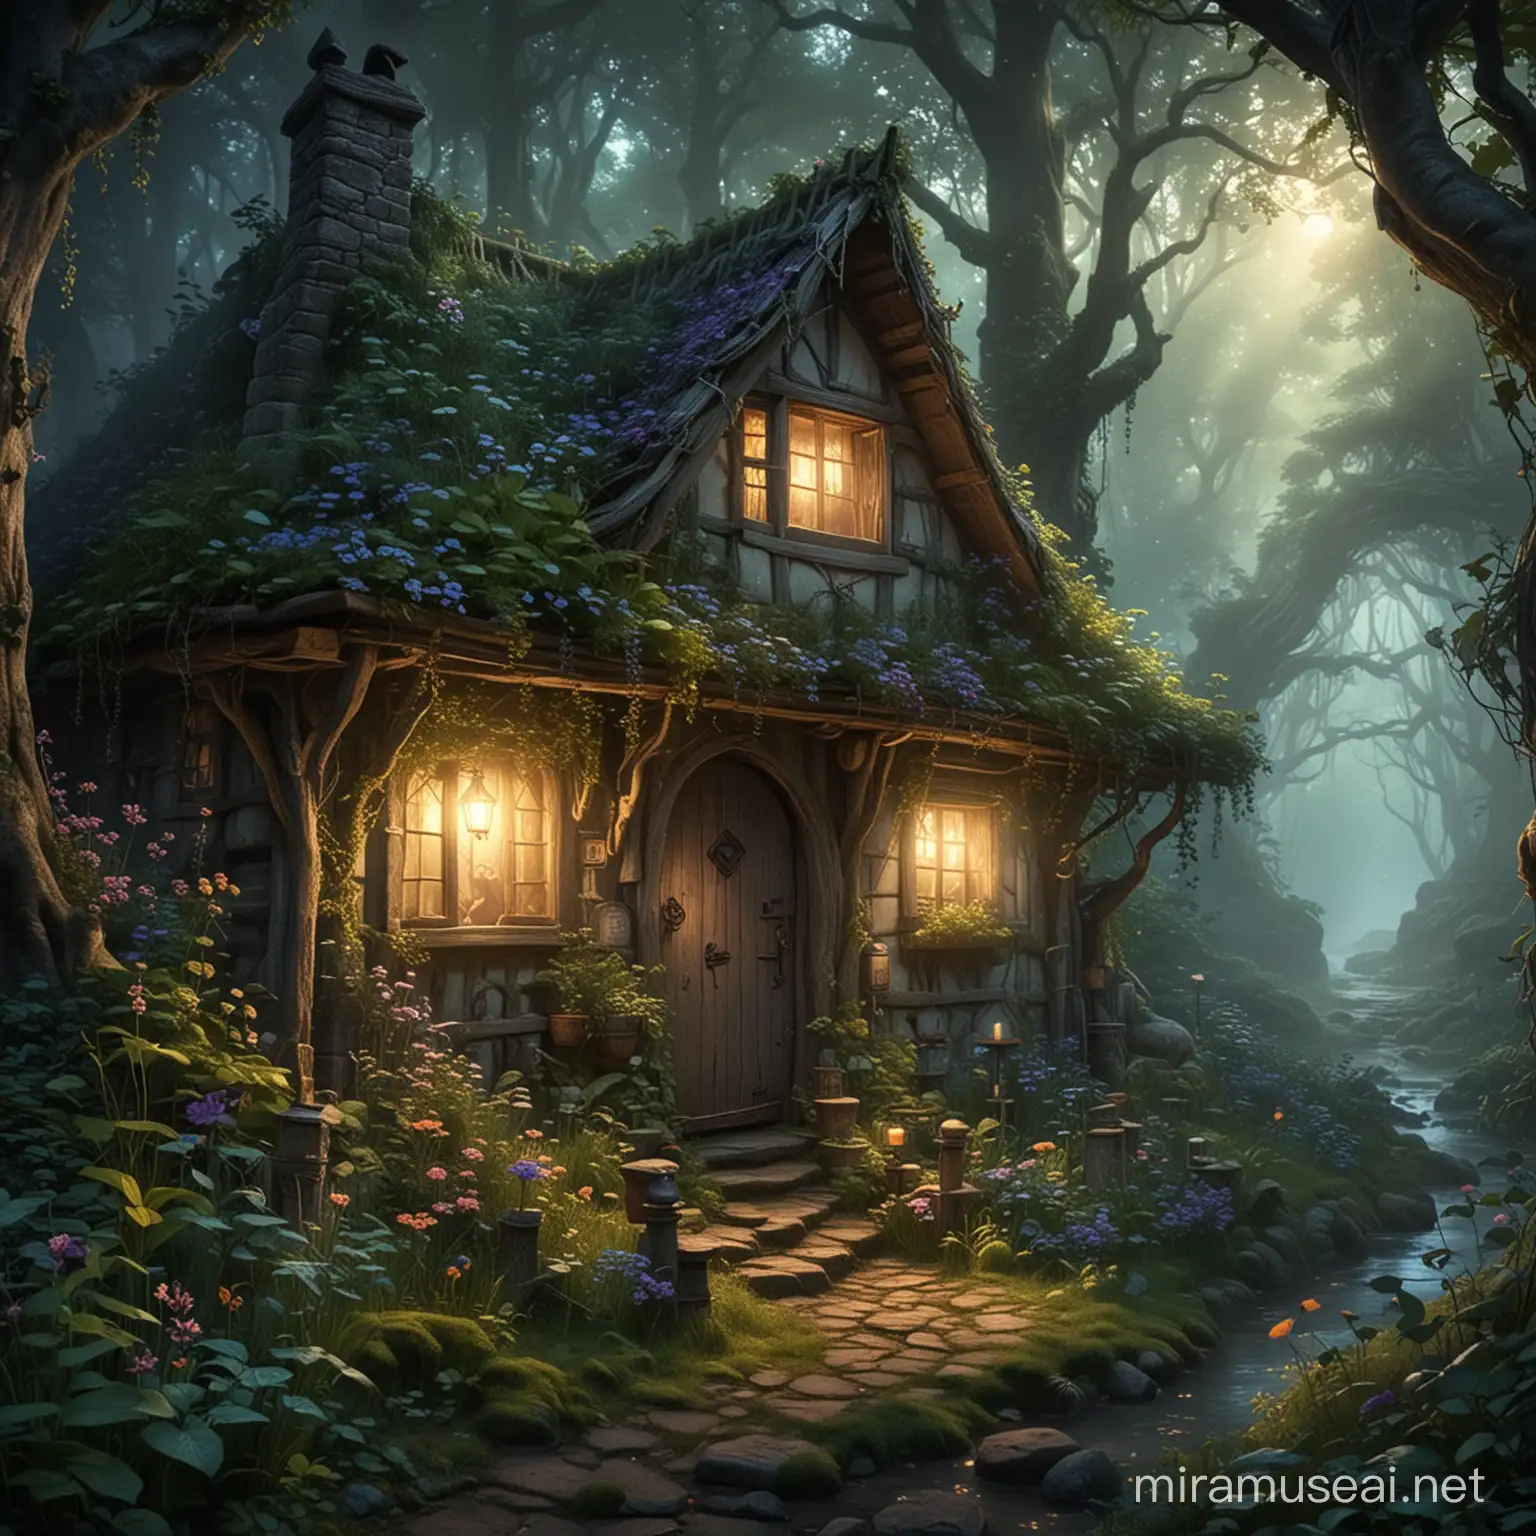 , Leo stumbled upon a hidden cottage deep in the heart of the enchanted forest. Inside, he discovered a wondrous sight: a kindly witch named Elara, whose mystical powers were said to make dreams come true.